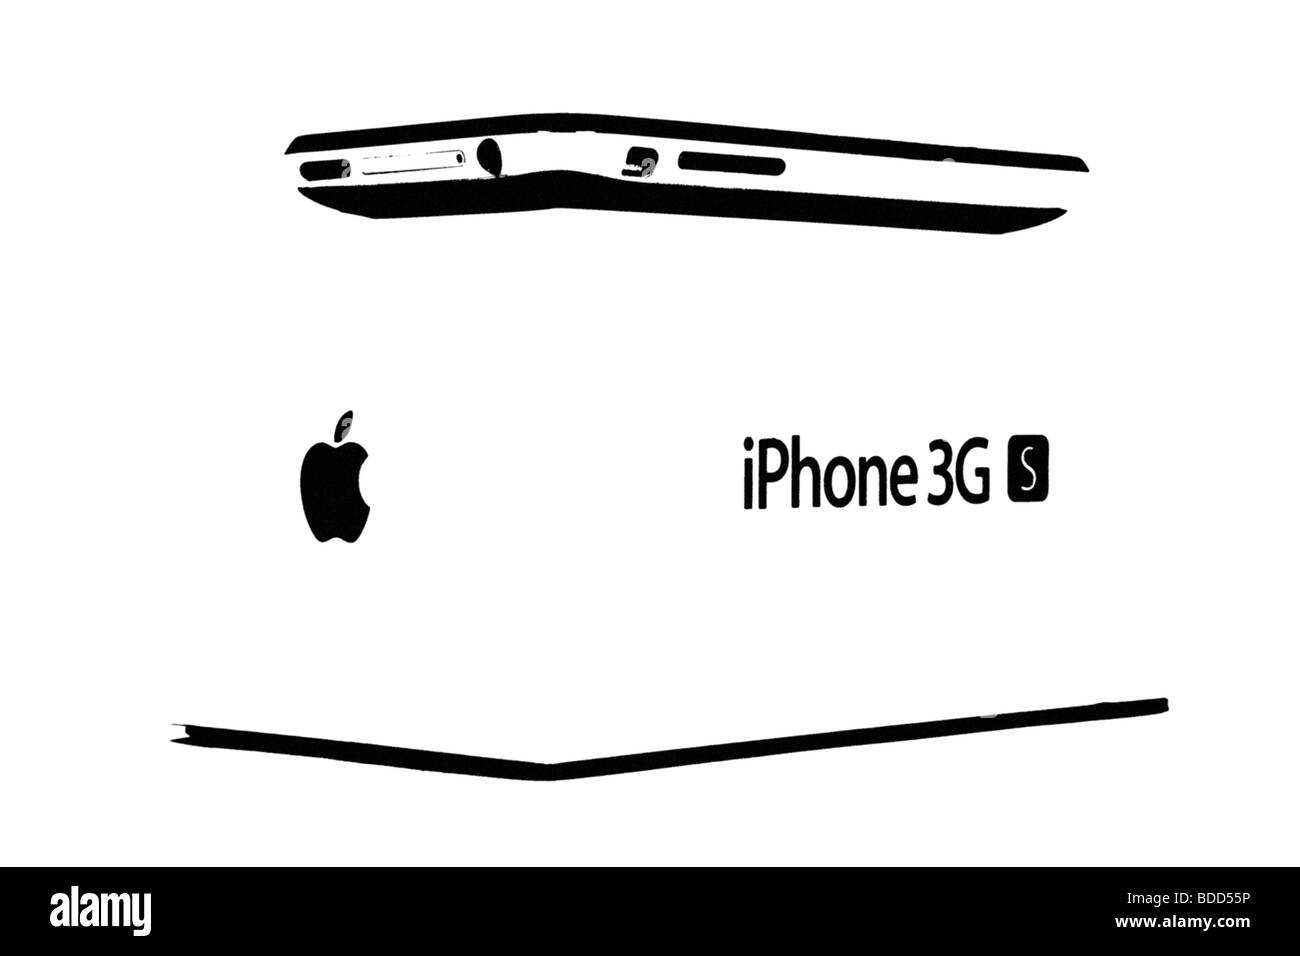 Modern photo of iphone 3g s in black and white Stock Photo